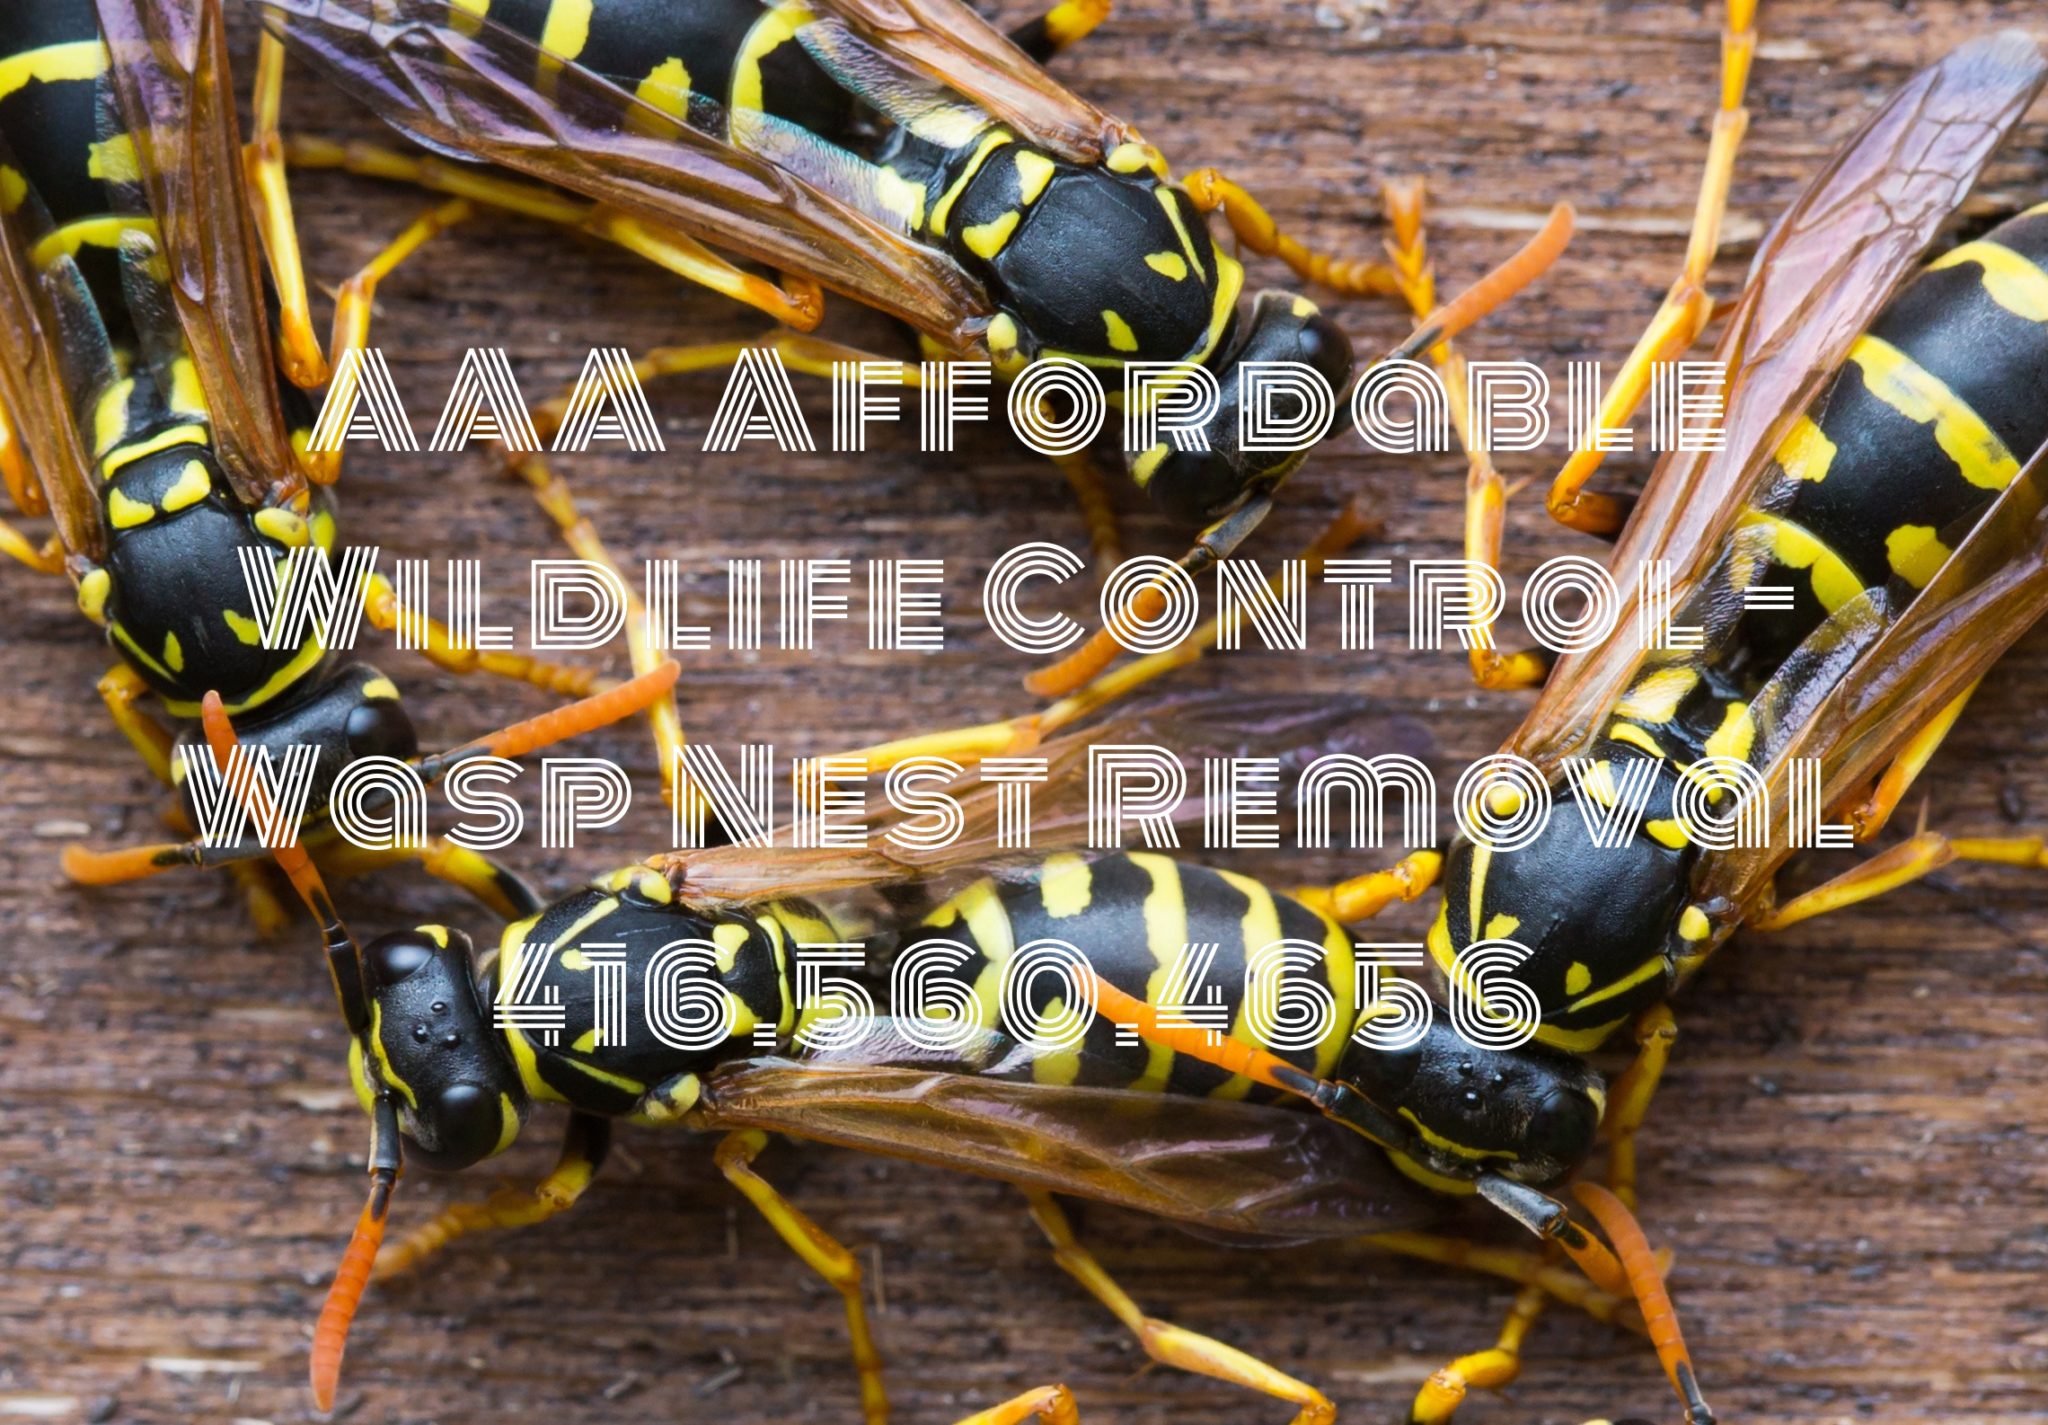 Wasp Nest Removal - Affordable Wildlife Control